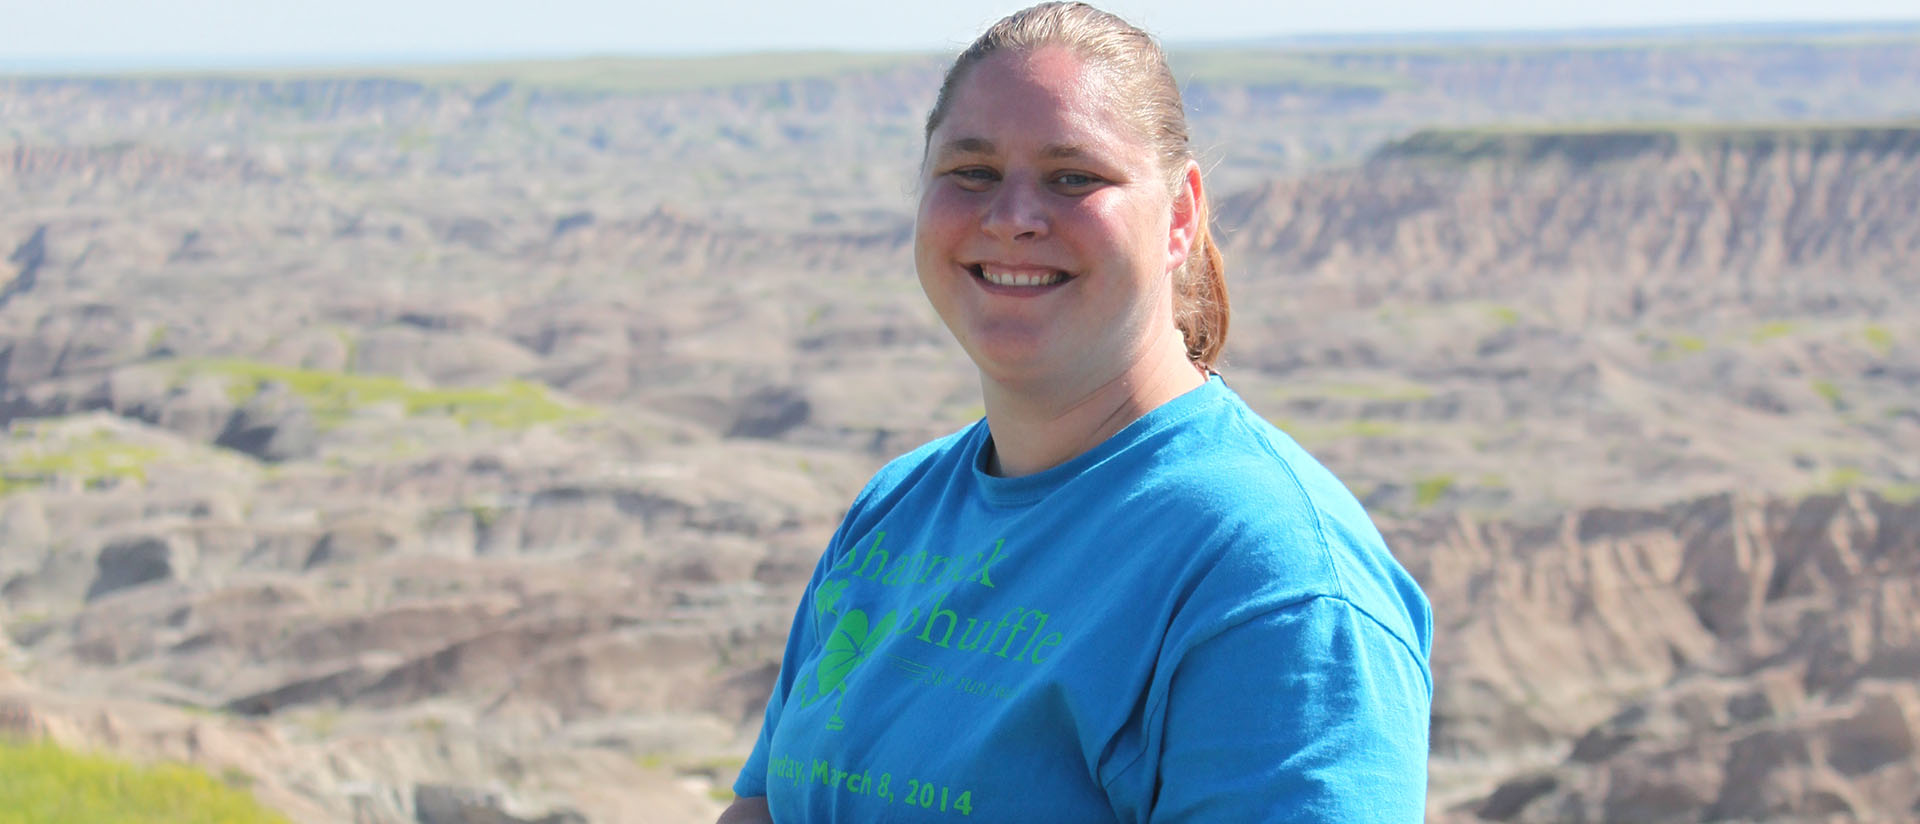 Kristi Bechtel, '14 AIS and social work graduate, who completed an internship at the Ho-Chunk nation social services.